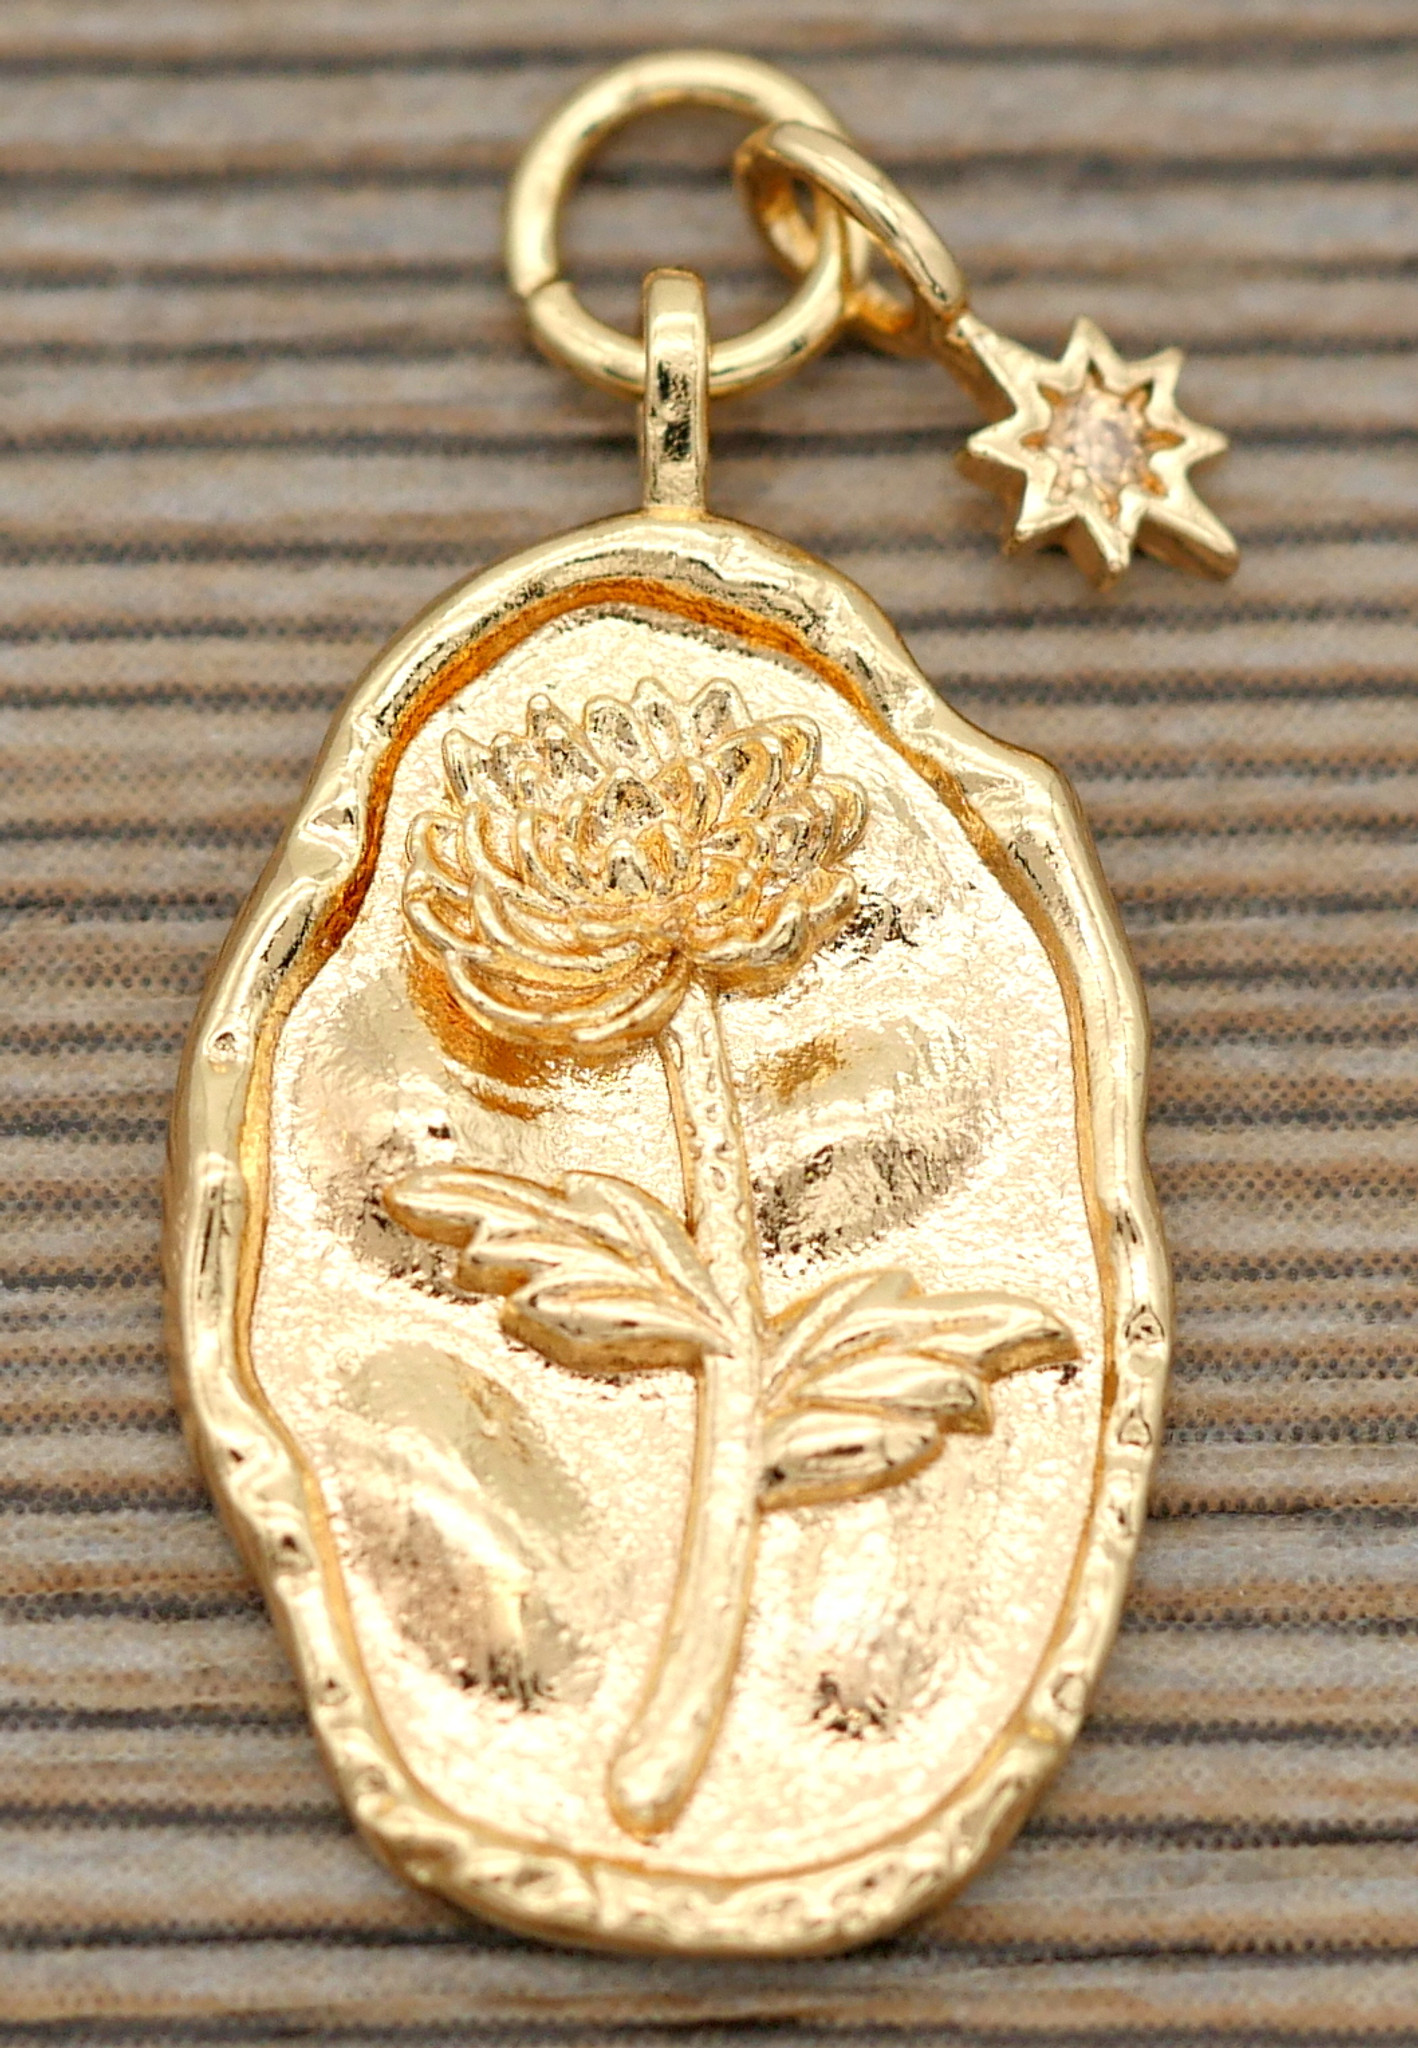 Gold Plated Healing Stone Charm